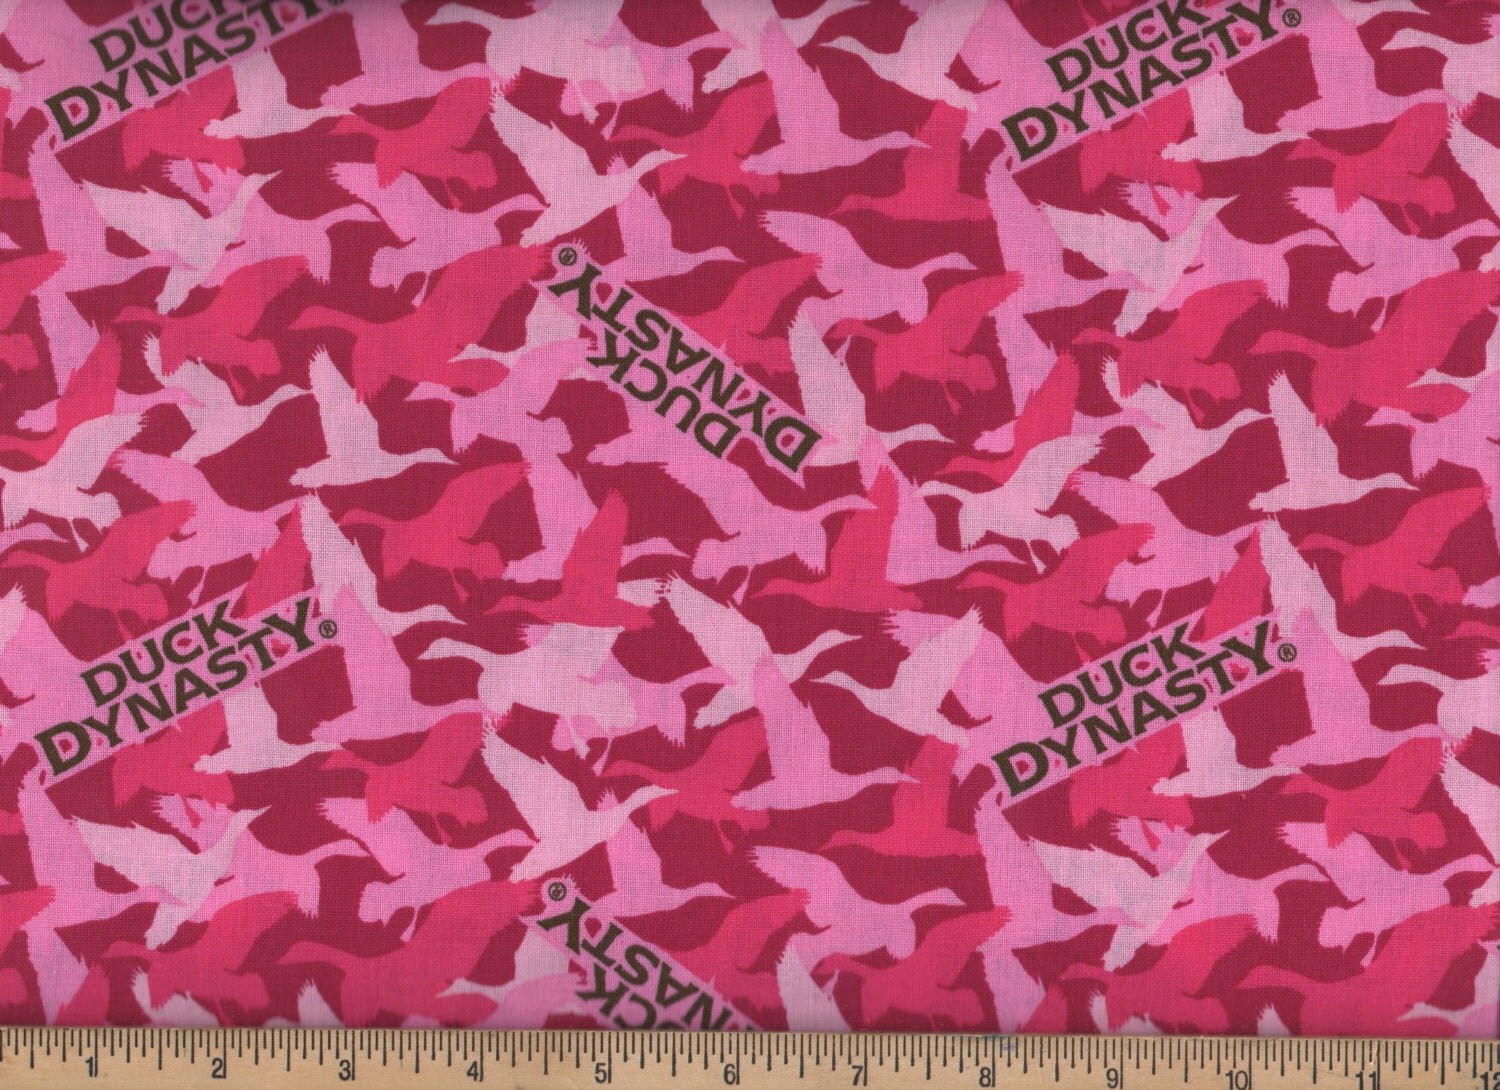 Duck Dynasty Camo Pink Cotton Camouflage Fabric By the Yard